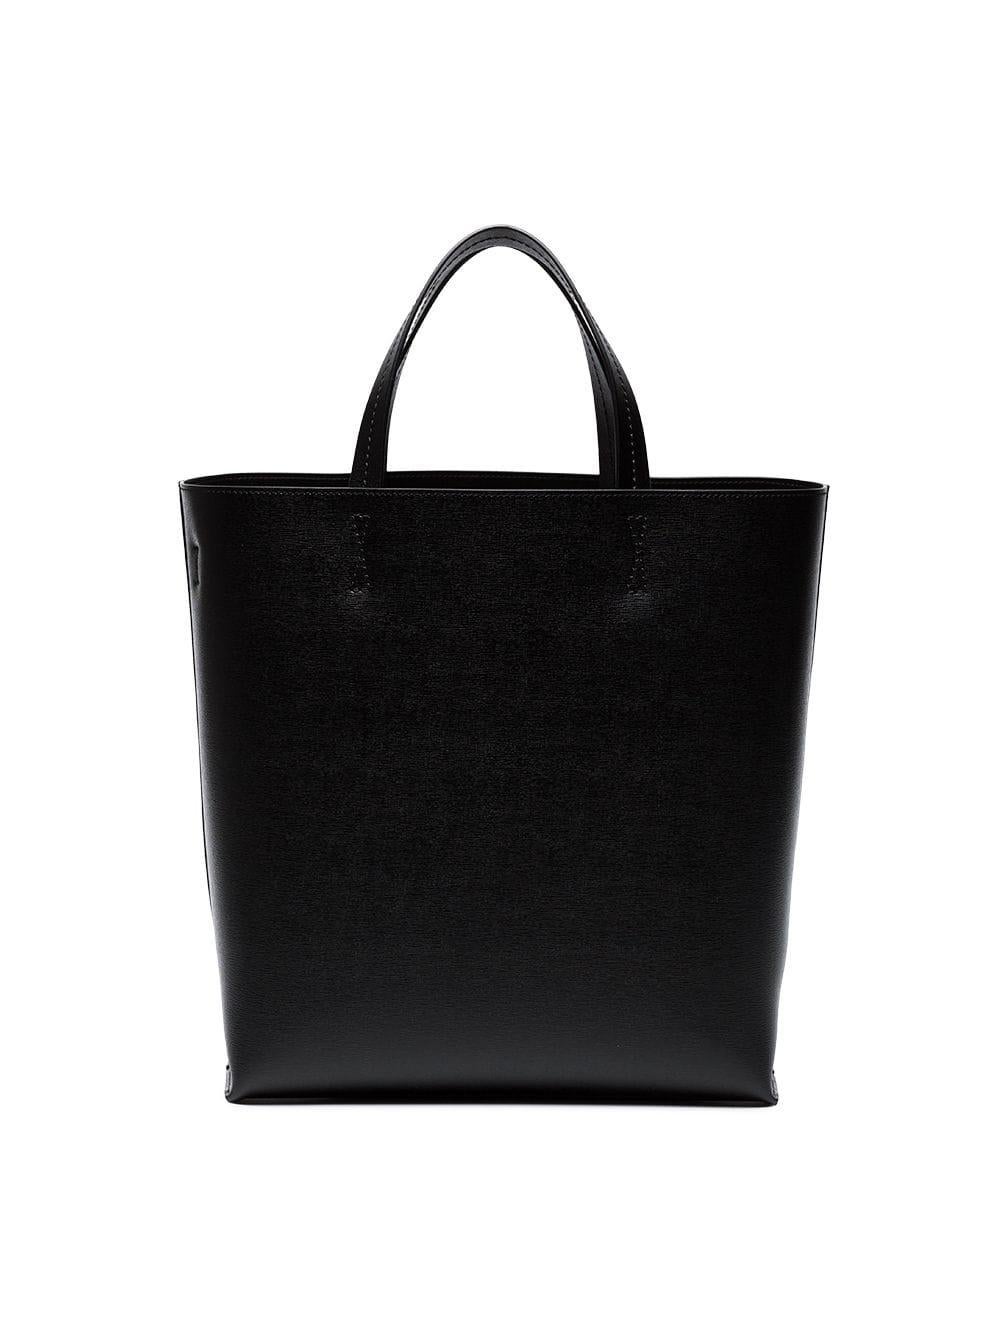 Off-White Black Leather Sculpture Tote Bag

The Sculpture Tote Bag features a leather body, flat leather handles, a detachable flat leather strap, and an open top.

Please note, these items are pre-owned and may show signs of being stored even when